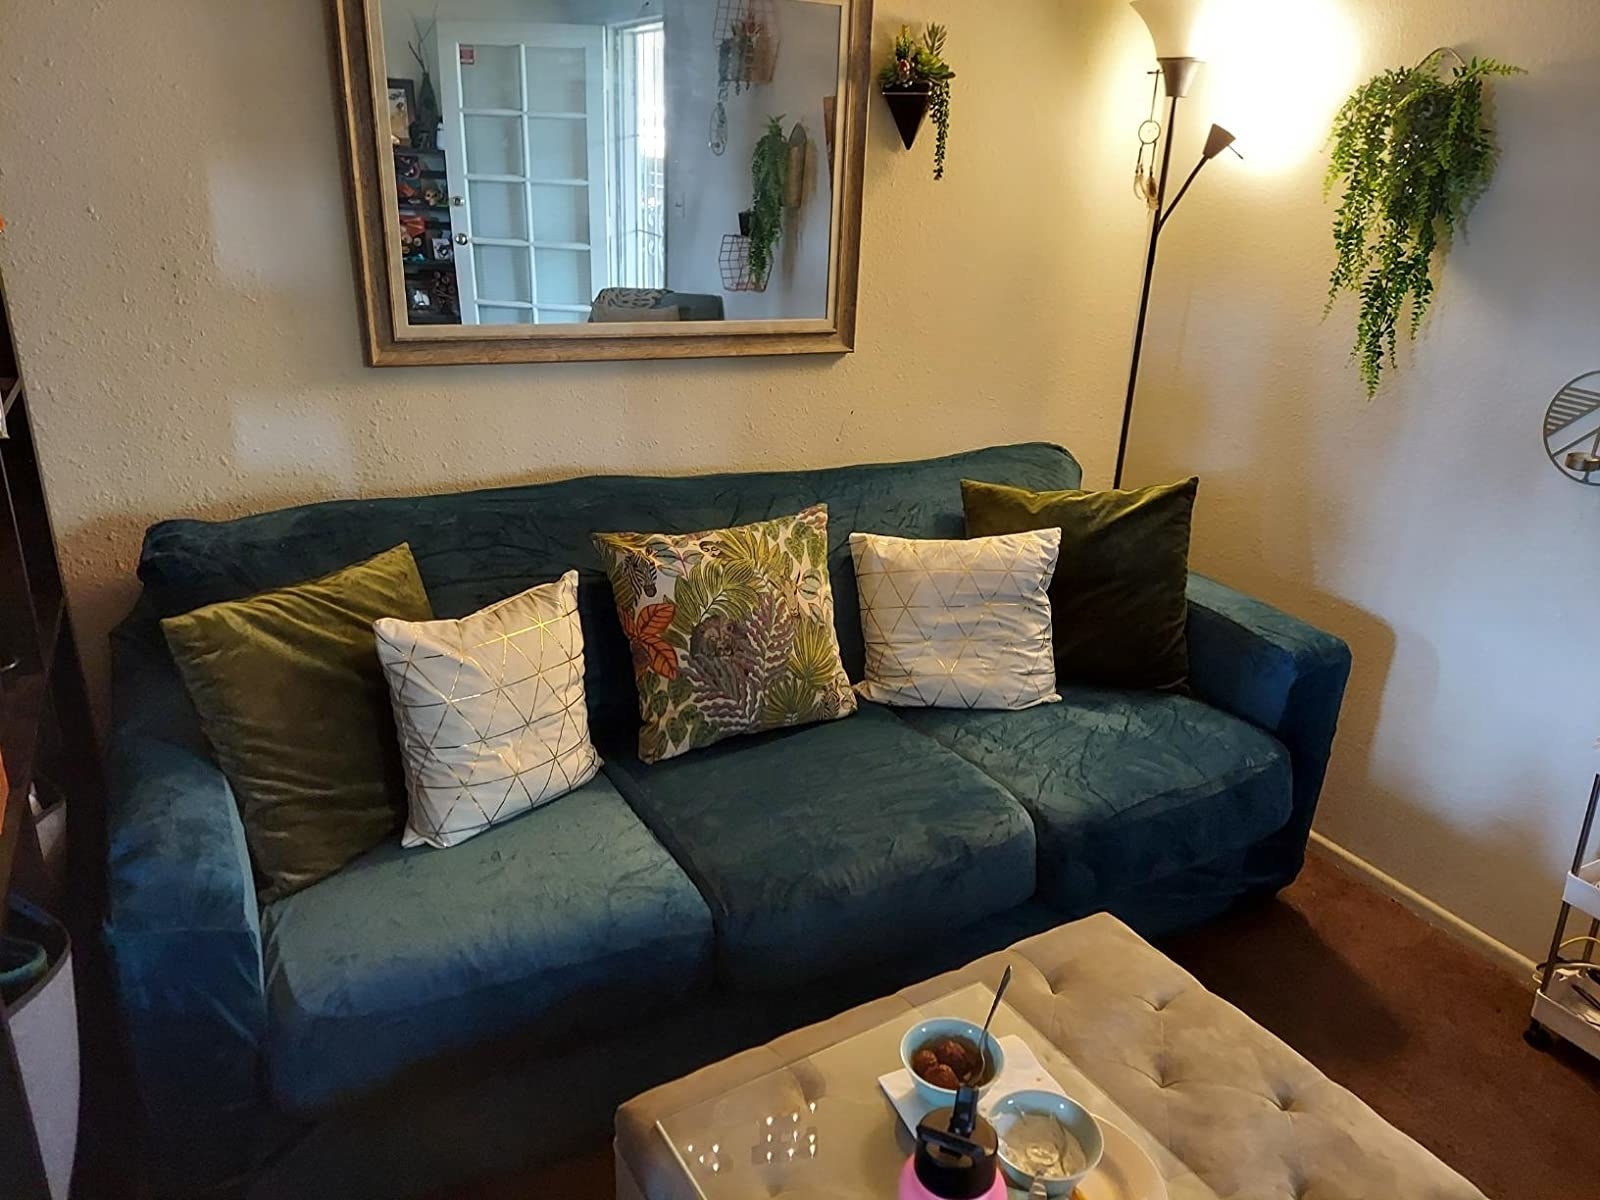 a review photo of the slipcover over a couch in velvet deep green and it fits perfectly